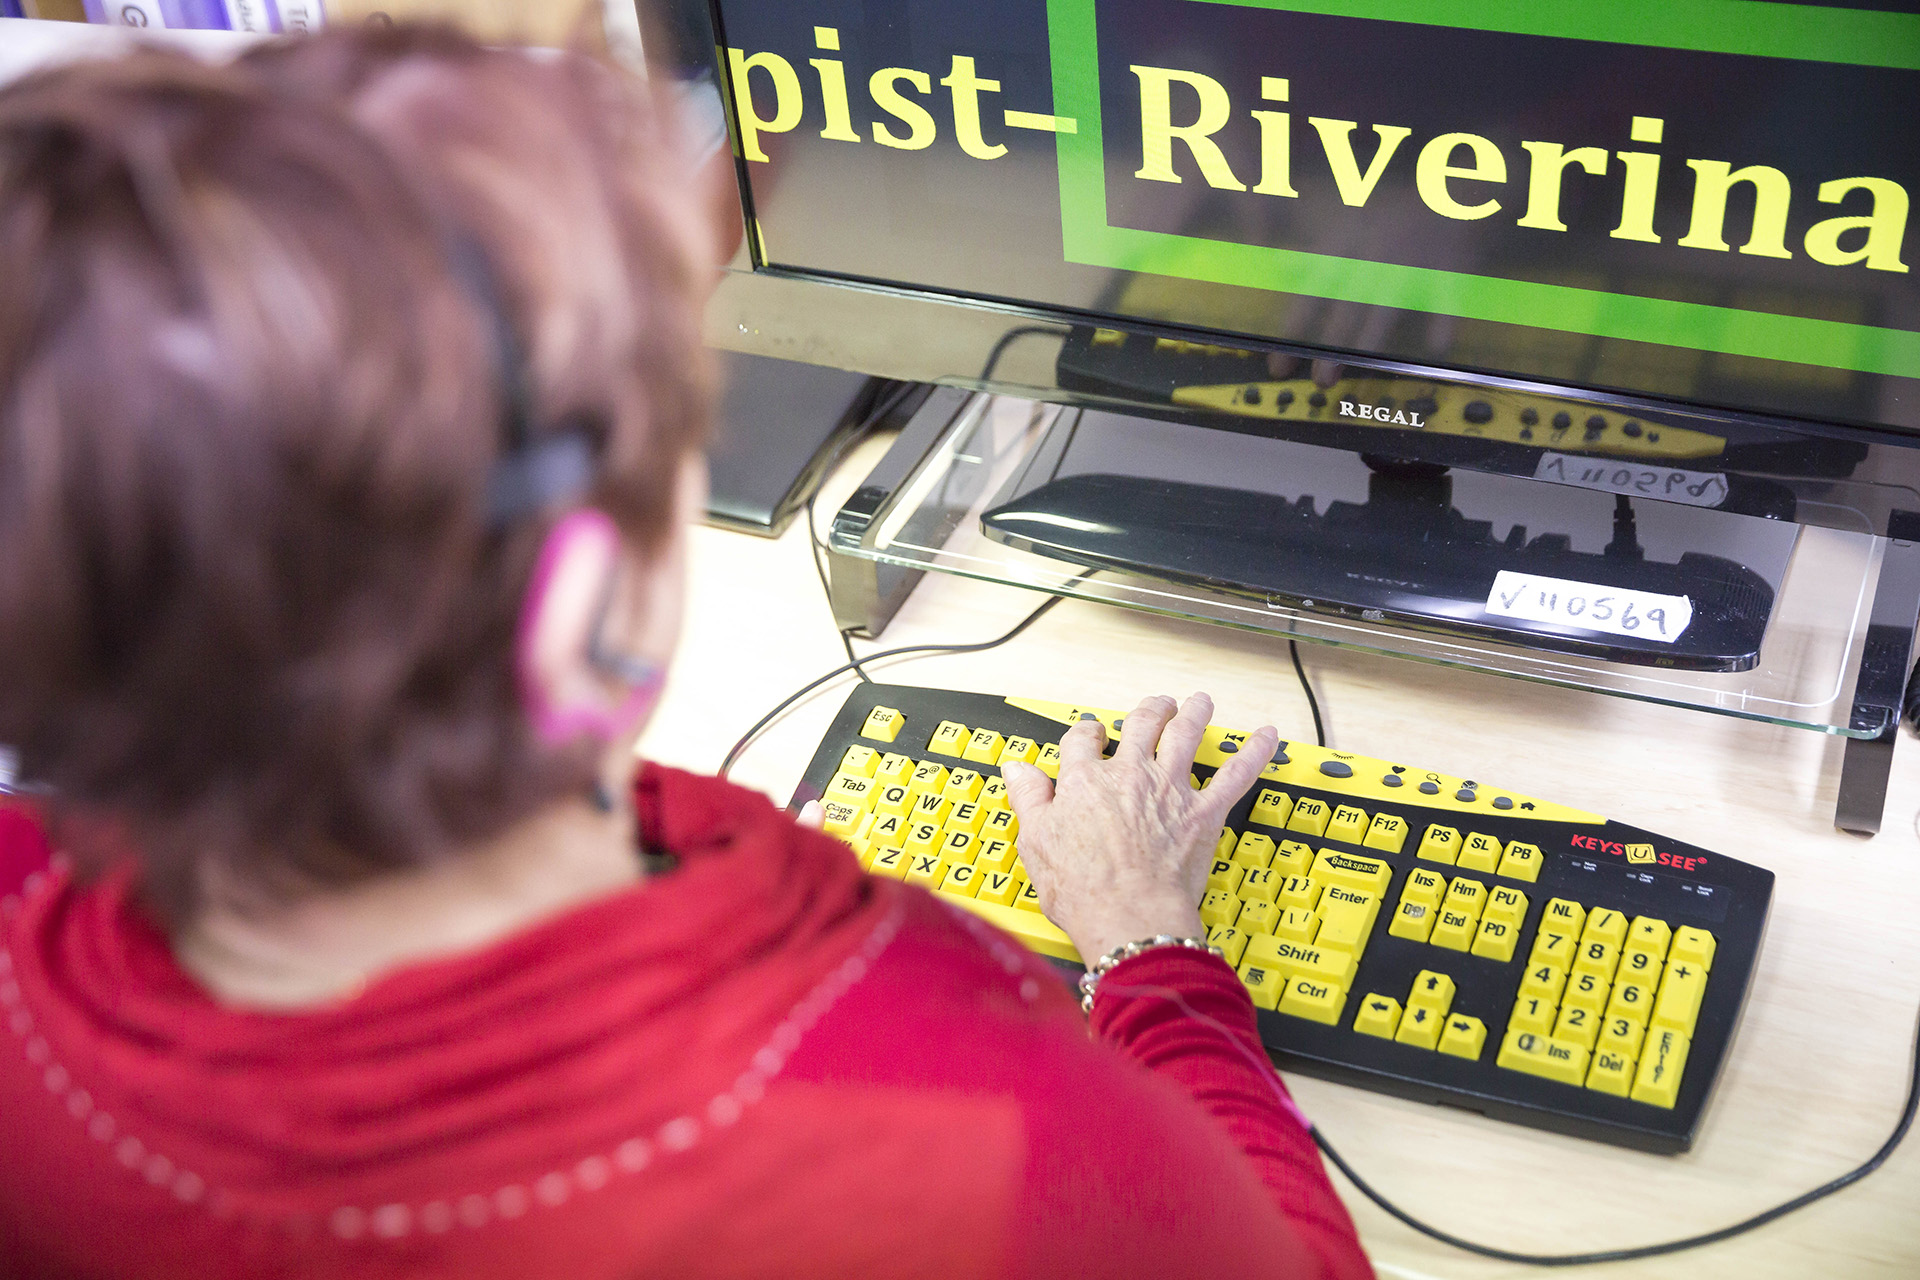 A woman with short hair uses a keyboard with bright yellow letters to type on a computer. On the screen, the word 'Riverina' is shown in large, bright yellow letters and is inside a bright green border